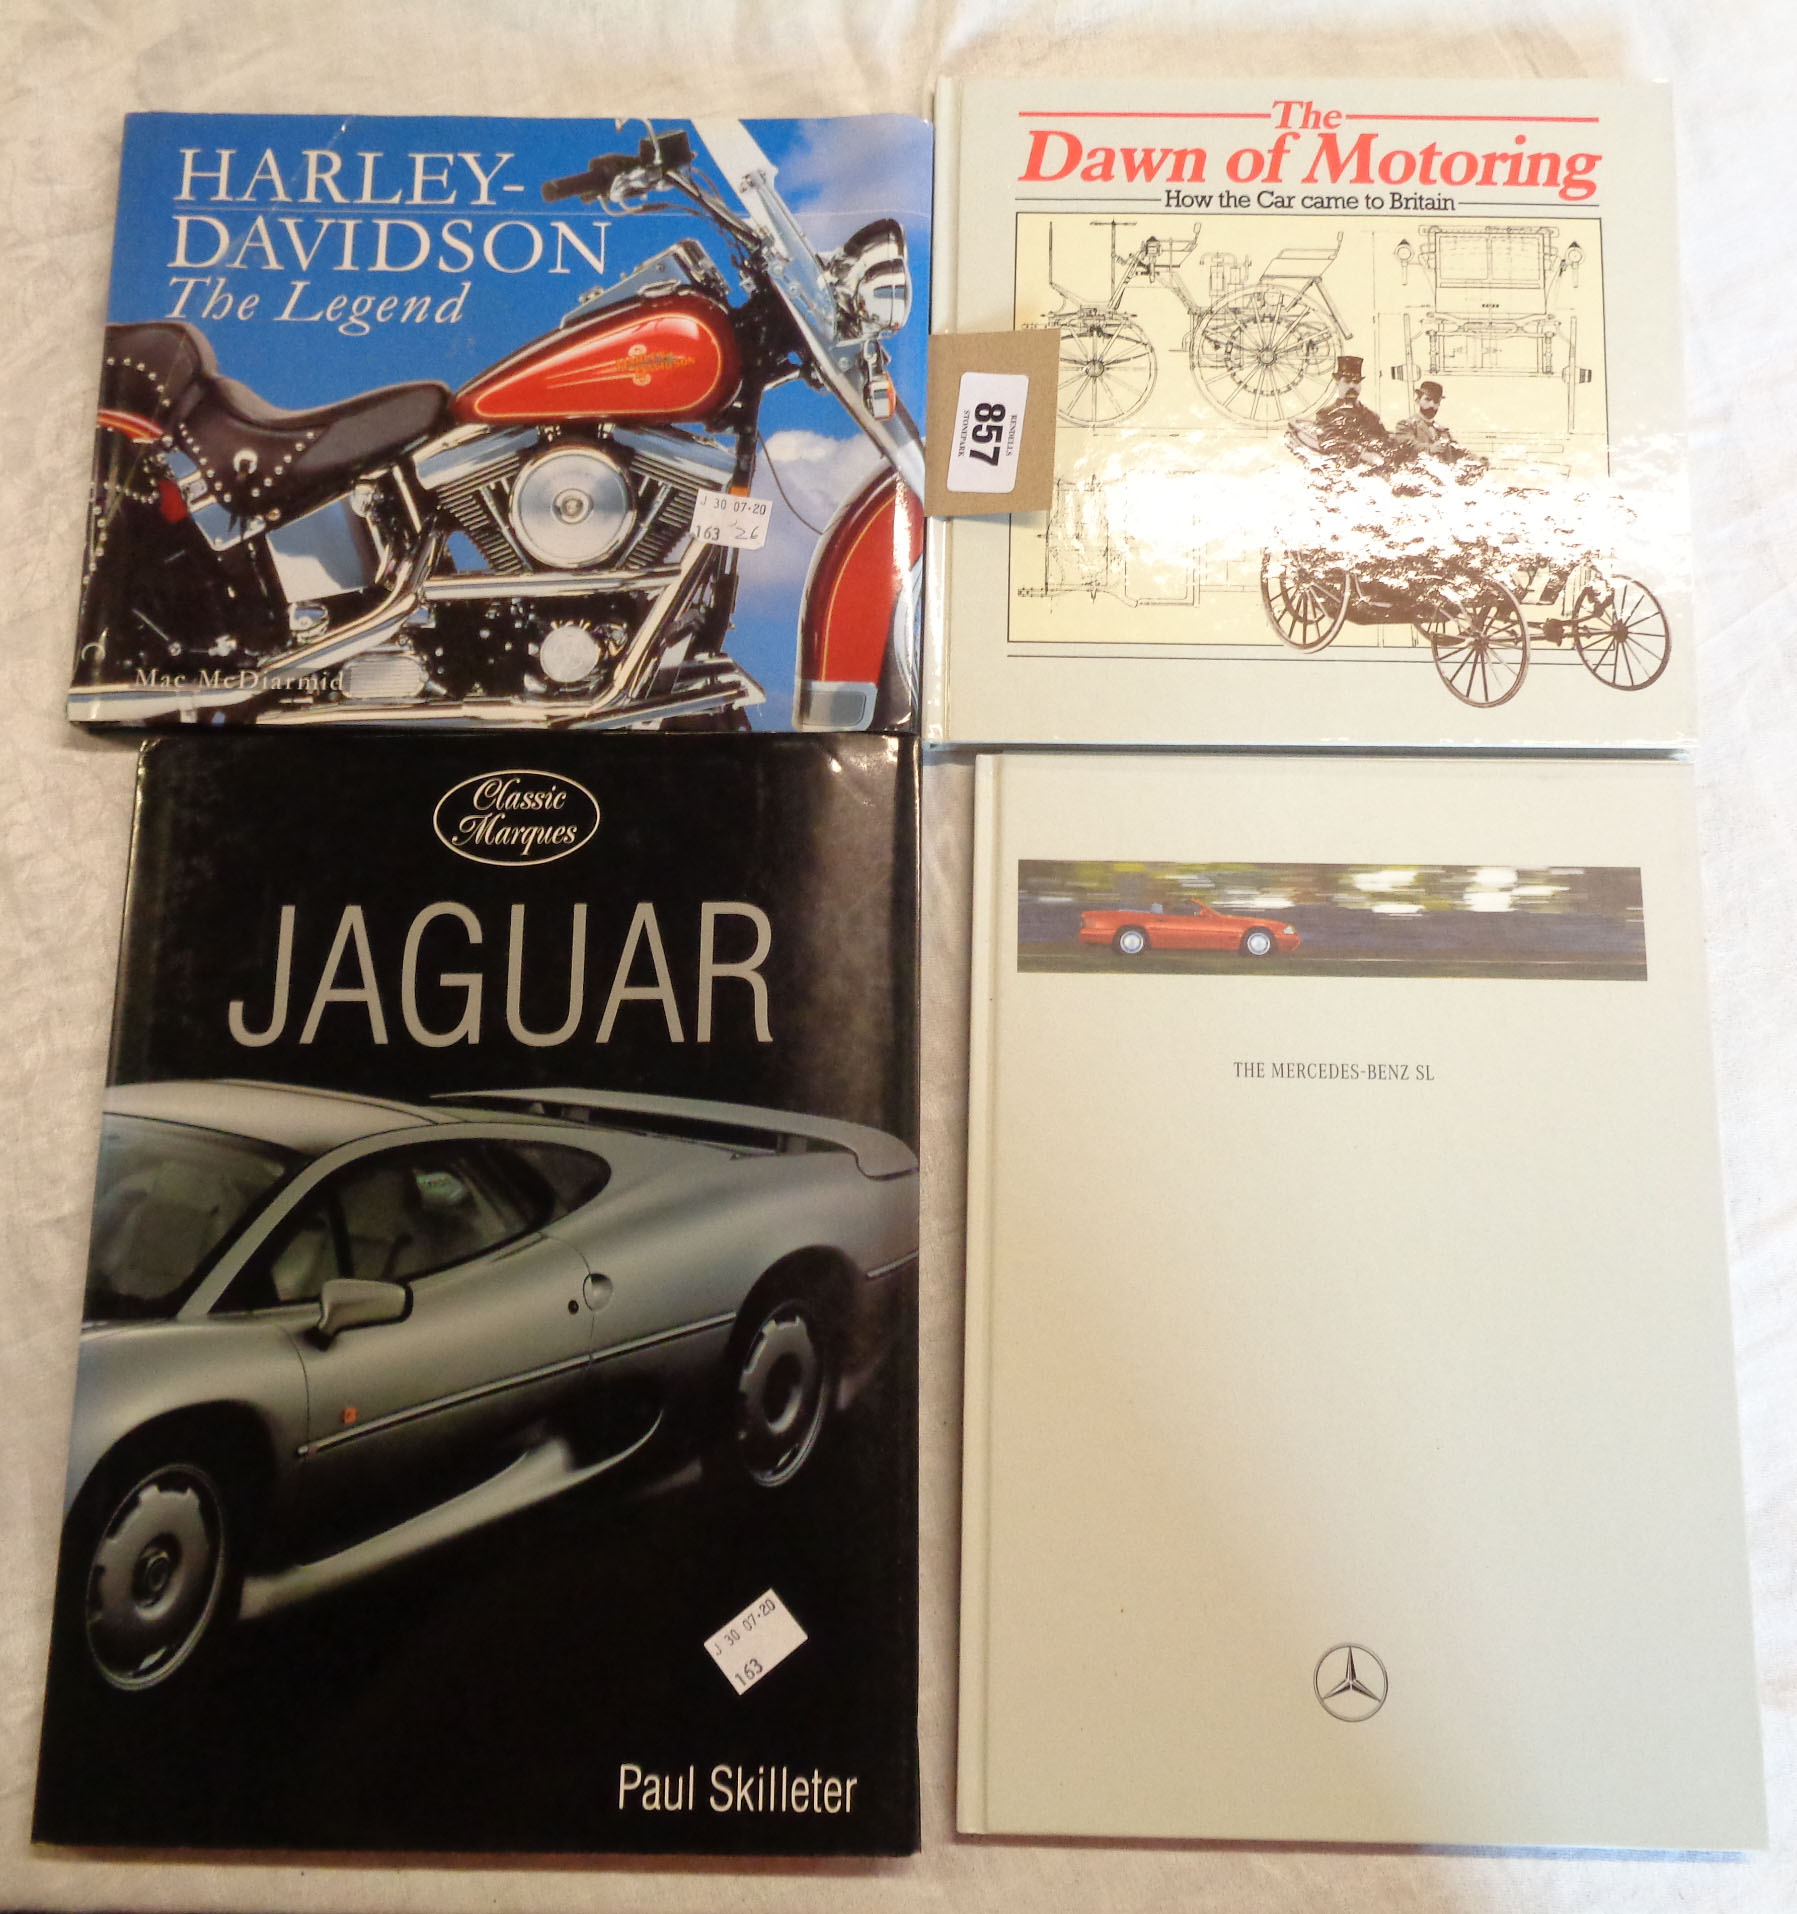 A small collection of automobila related books and ephemera including Harley Davidson, Jaguar, etc.